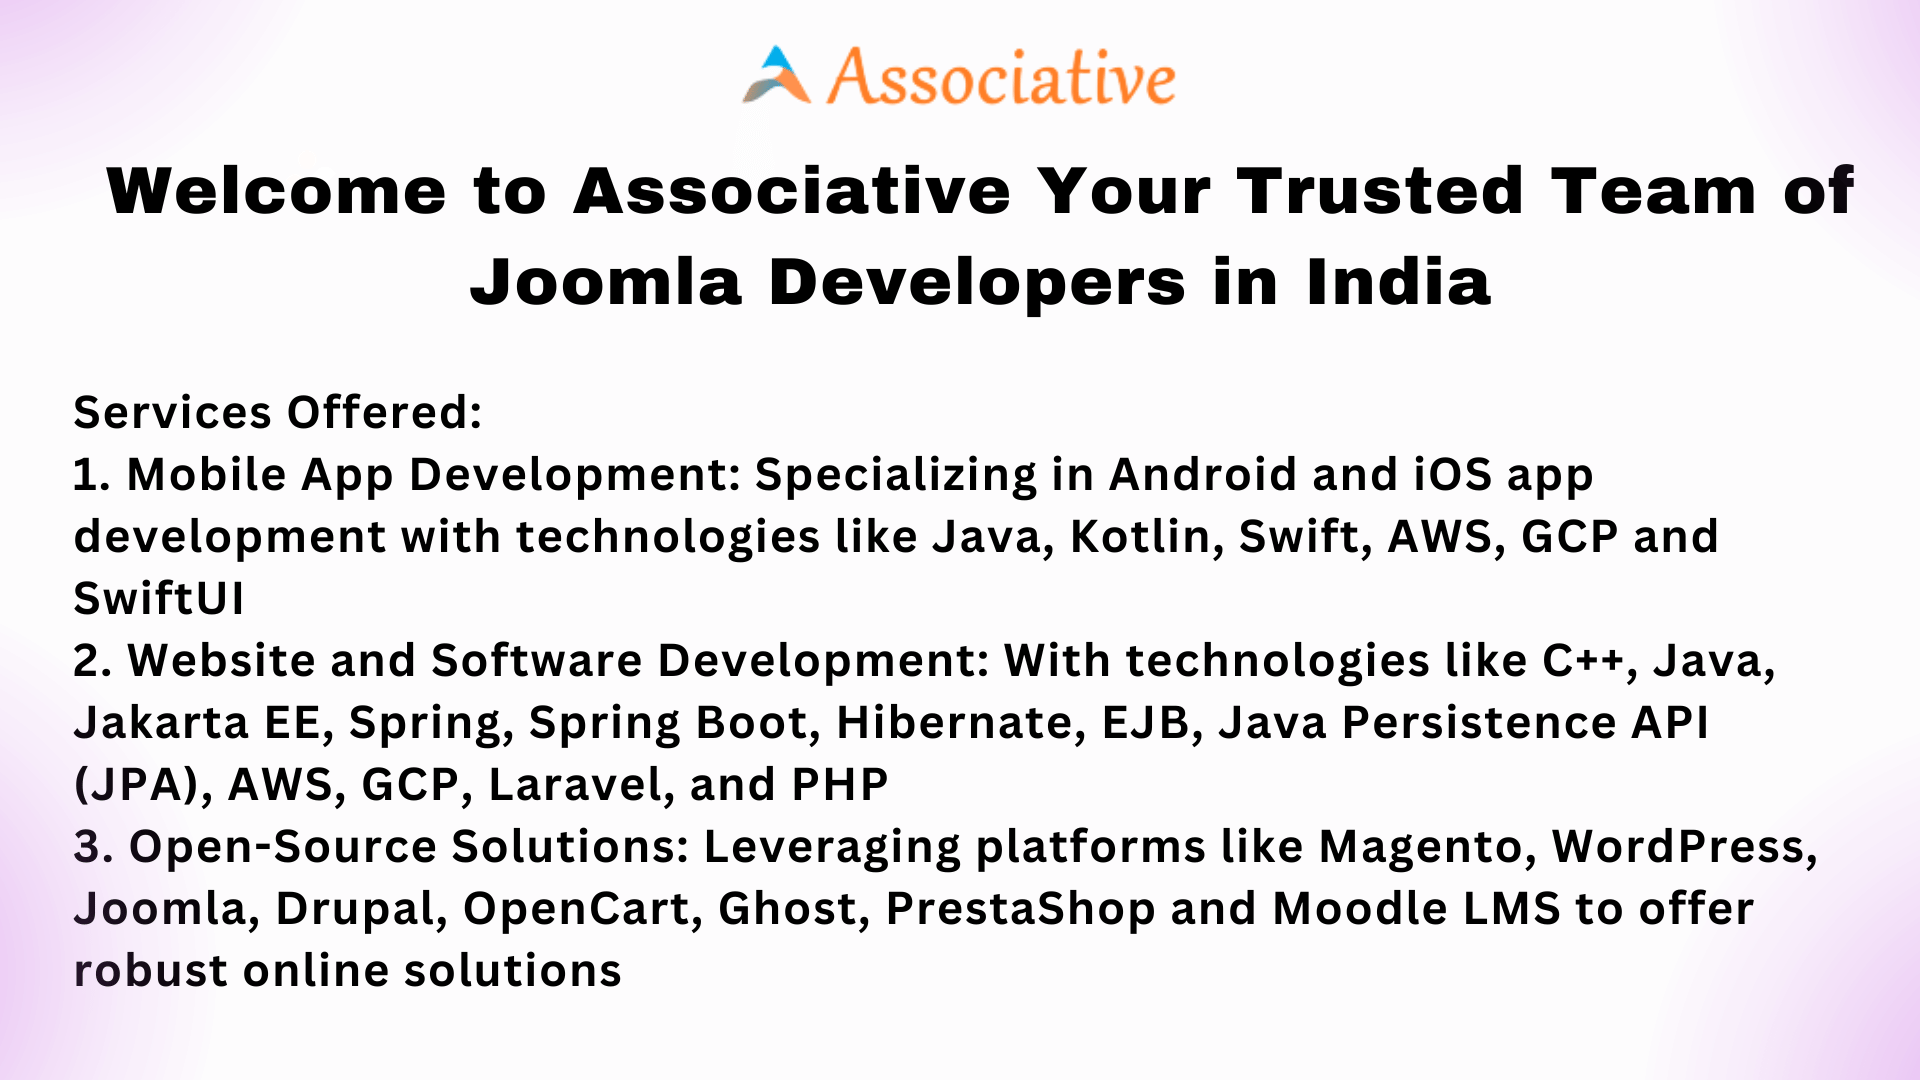 Welcome to Associative Your Trusted Team of Joomla Developers in India